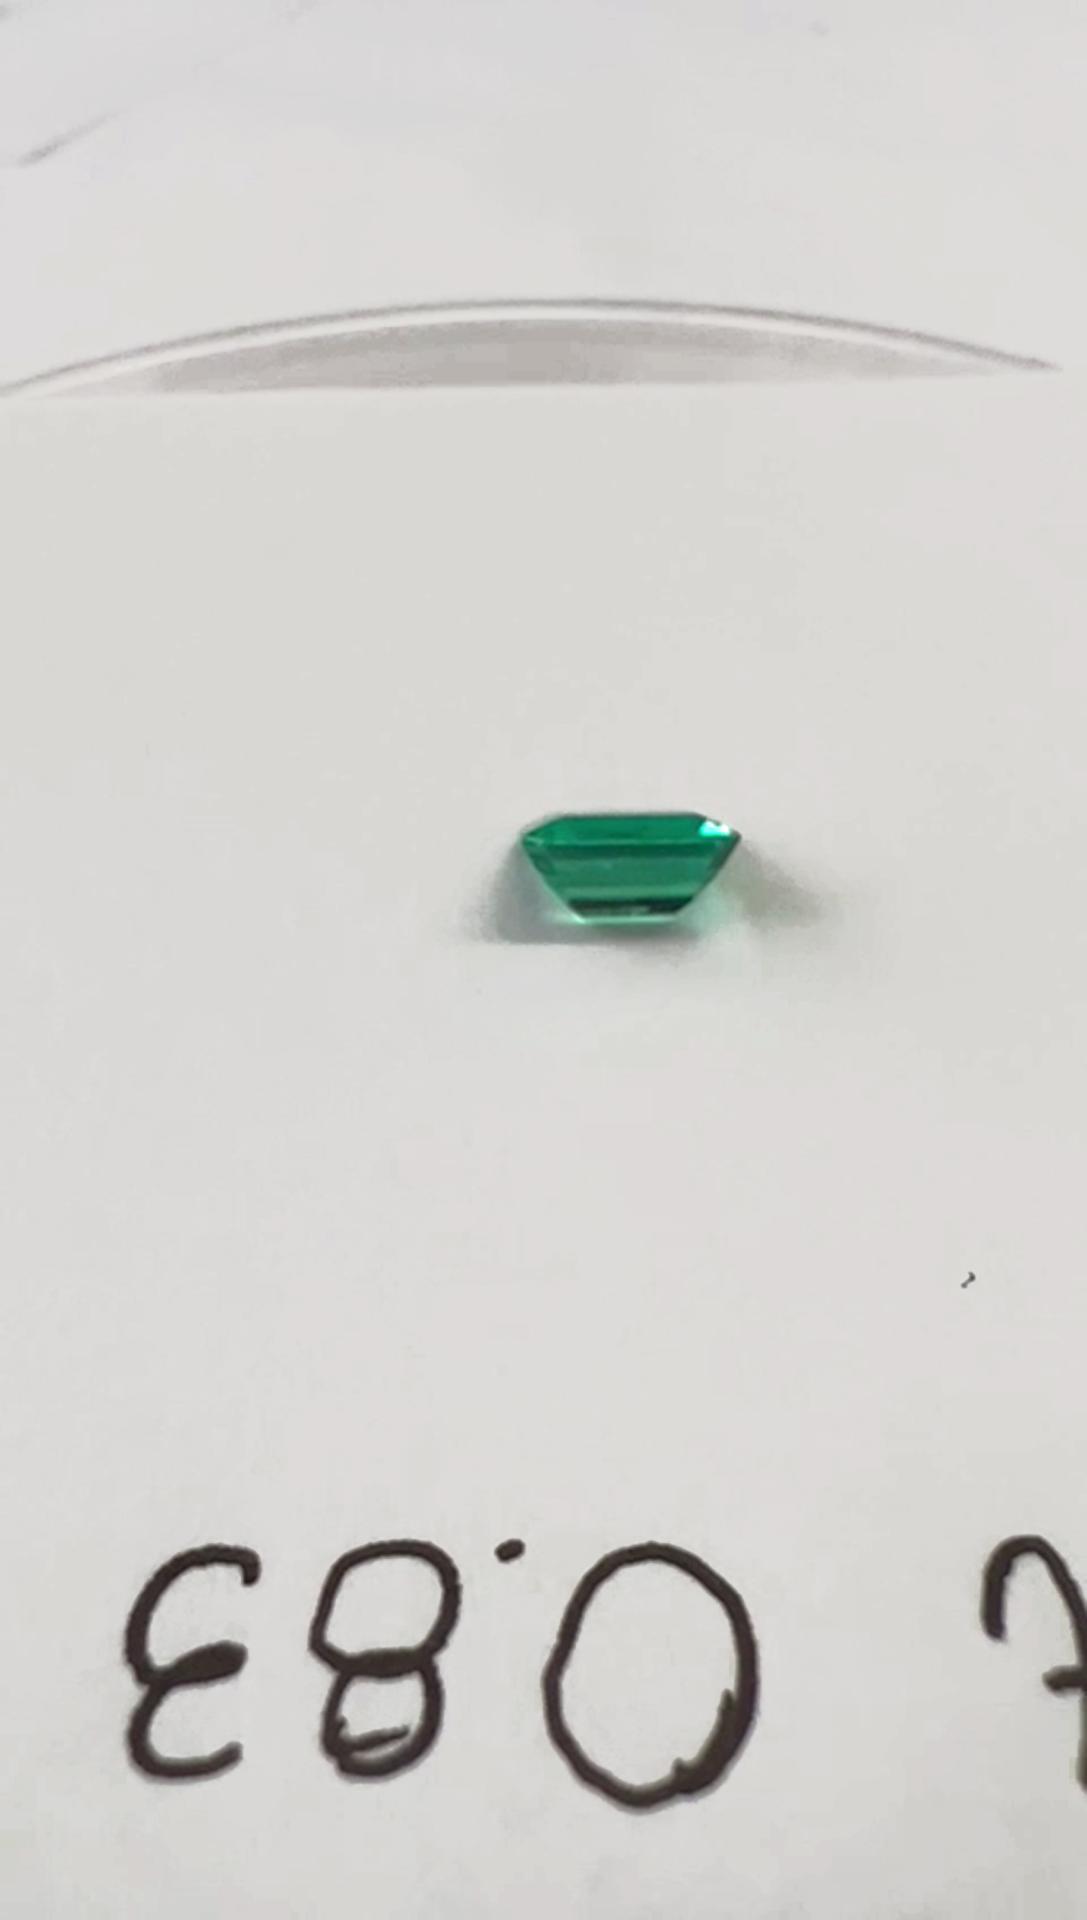 0.83 Ct. Colombian Emerald  (Exceptional)